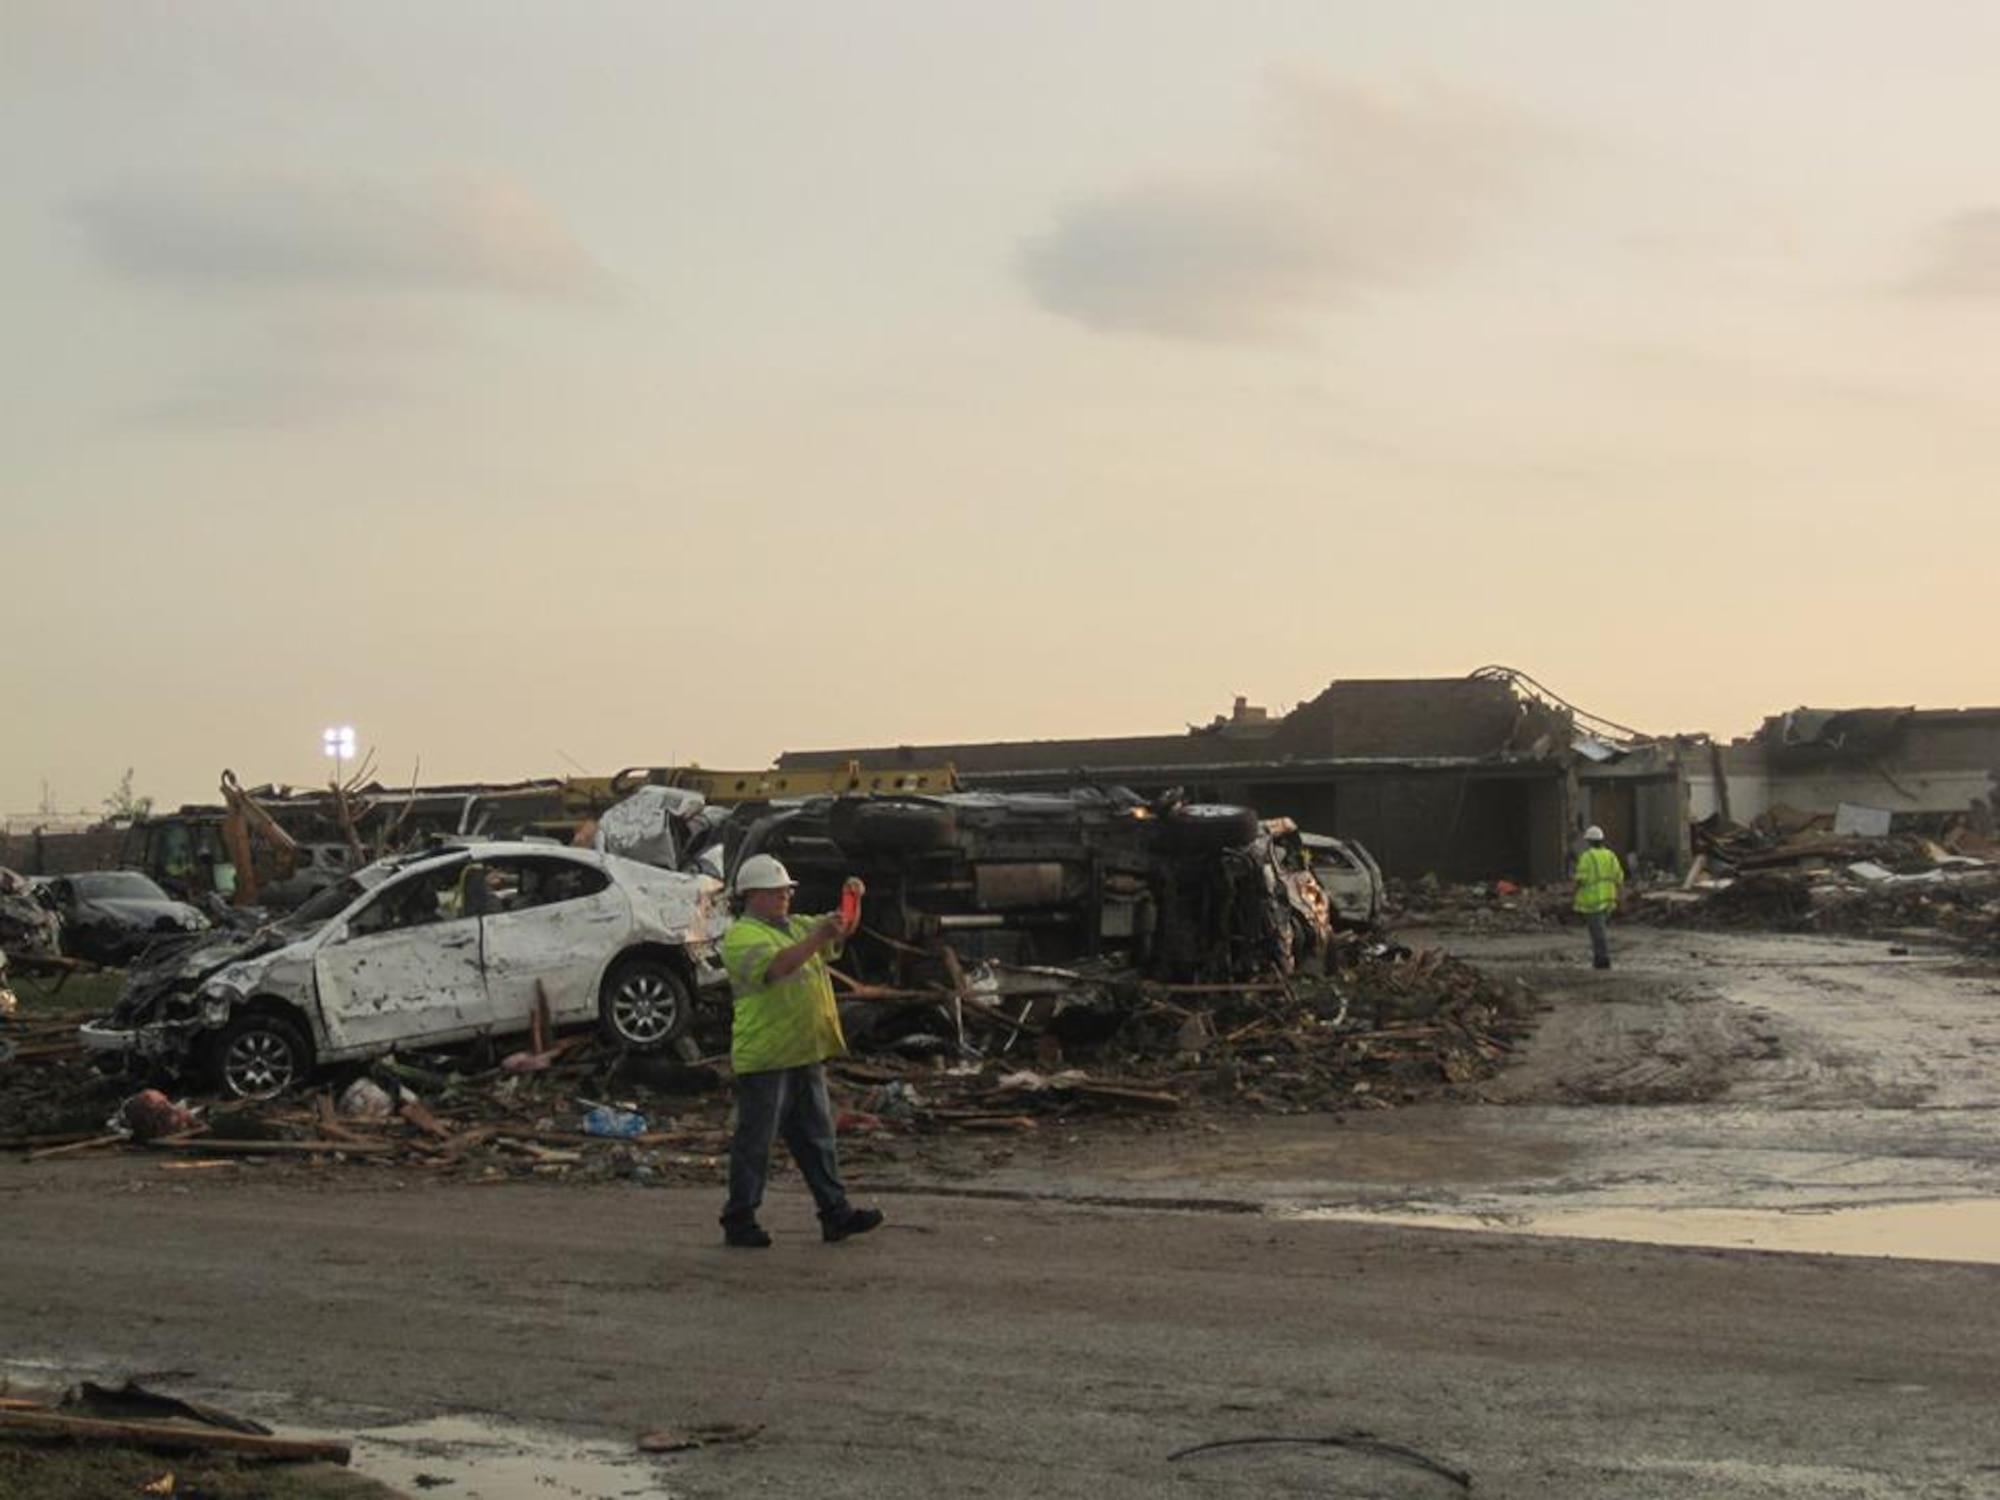 Workers survey the site of a school leveled by a massive 1.3-mile-wide tornado that touched down in Moore, Okla., May 20. (U.S. Air Force photo/Staff Sgt. Brandi Smith)